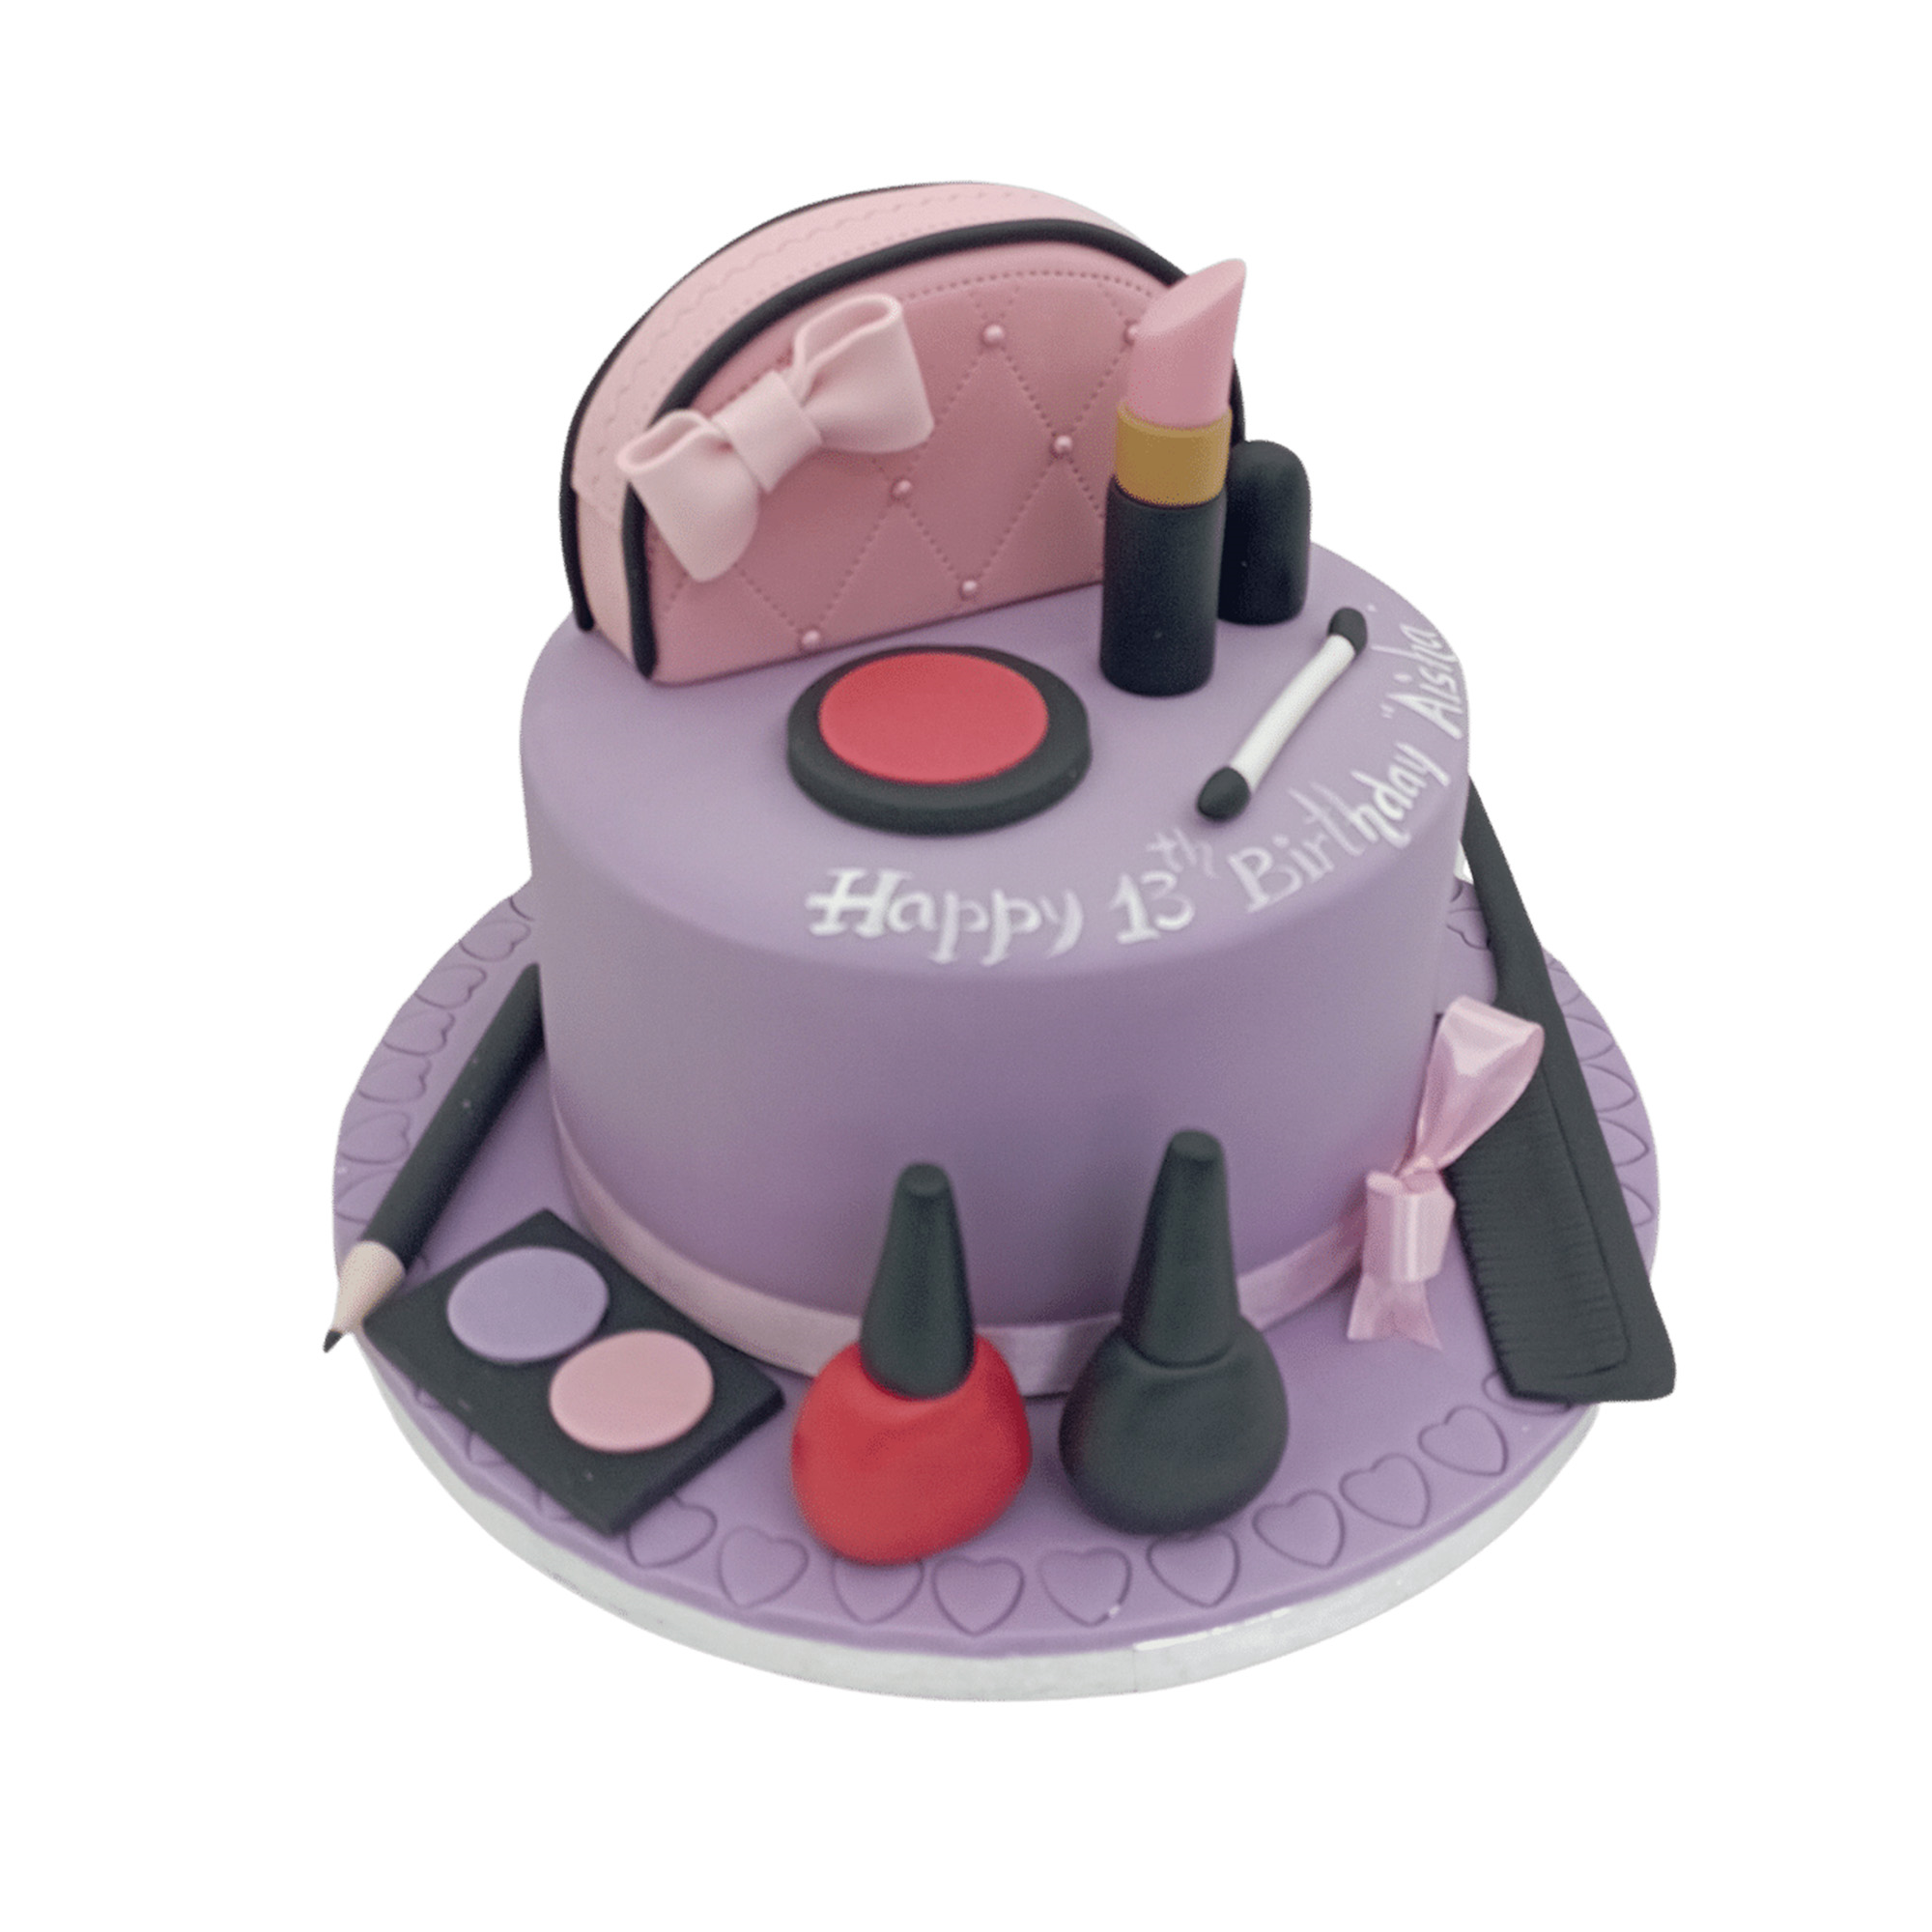 Makeup themed Birthday Cake for daughter